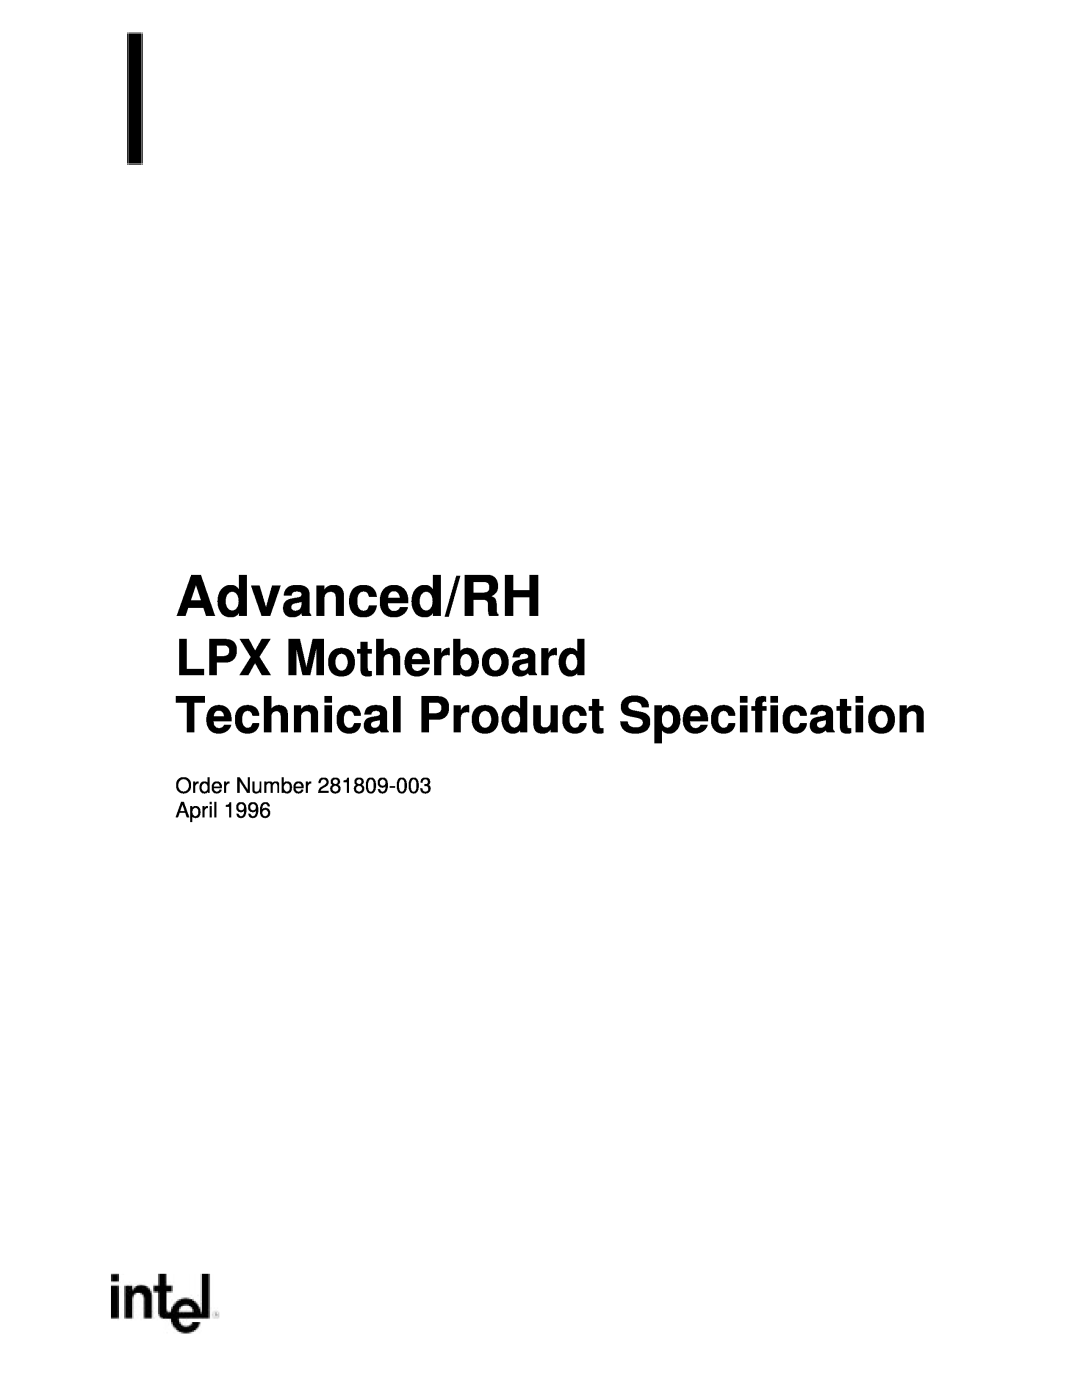 Intel 281809-003 manual Order Number April, Advanced/RH, LPX Motherboard Technical Product Specification 